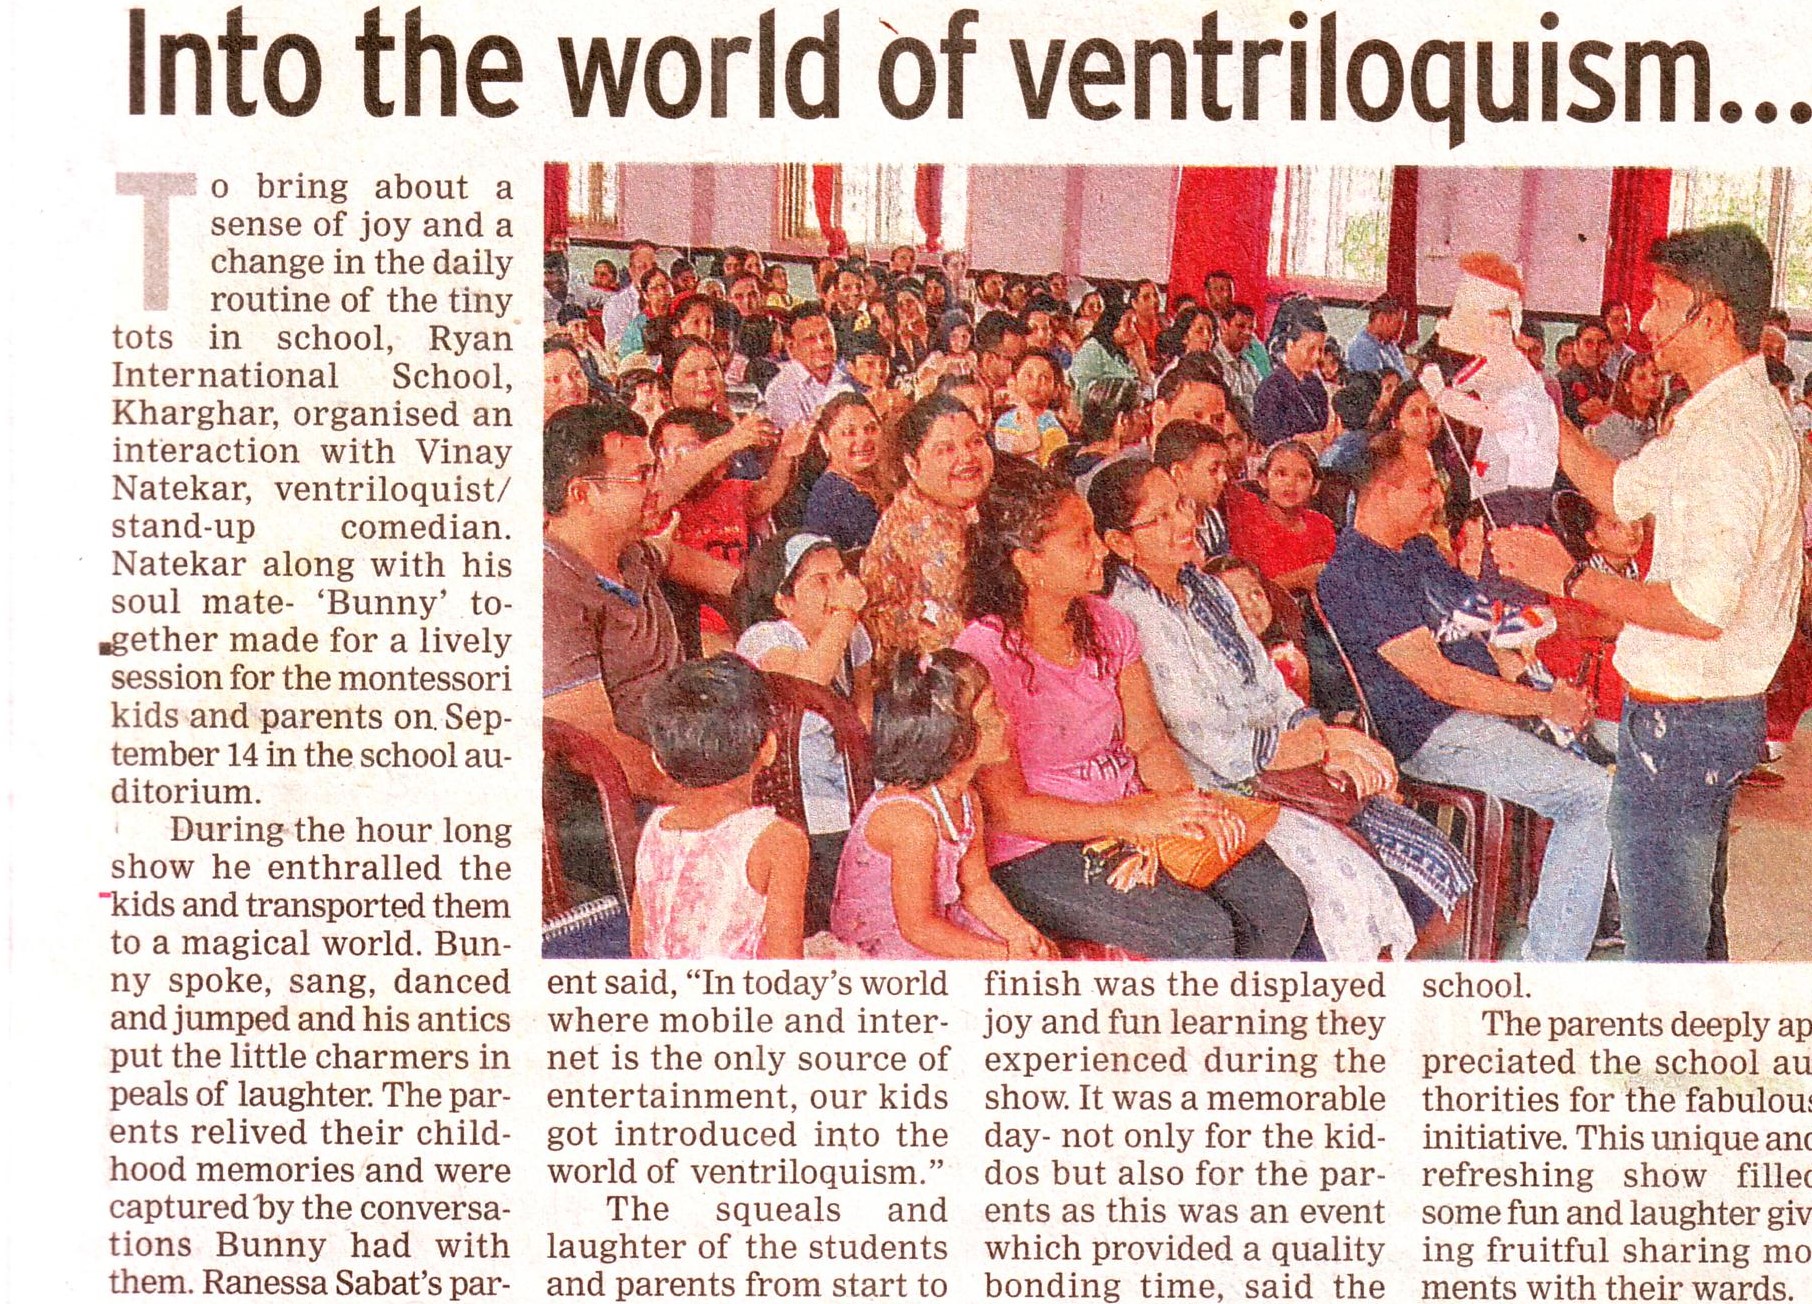 Into the world of ventriloquism was mentioned in Time NIE - Ryan International School, Kharghar